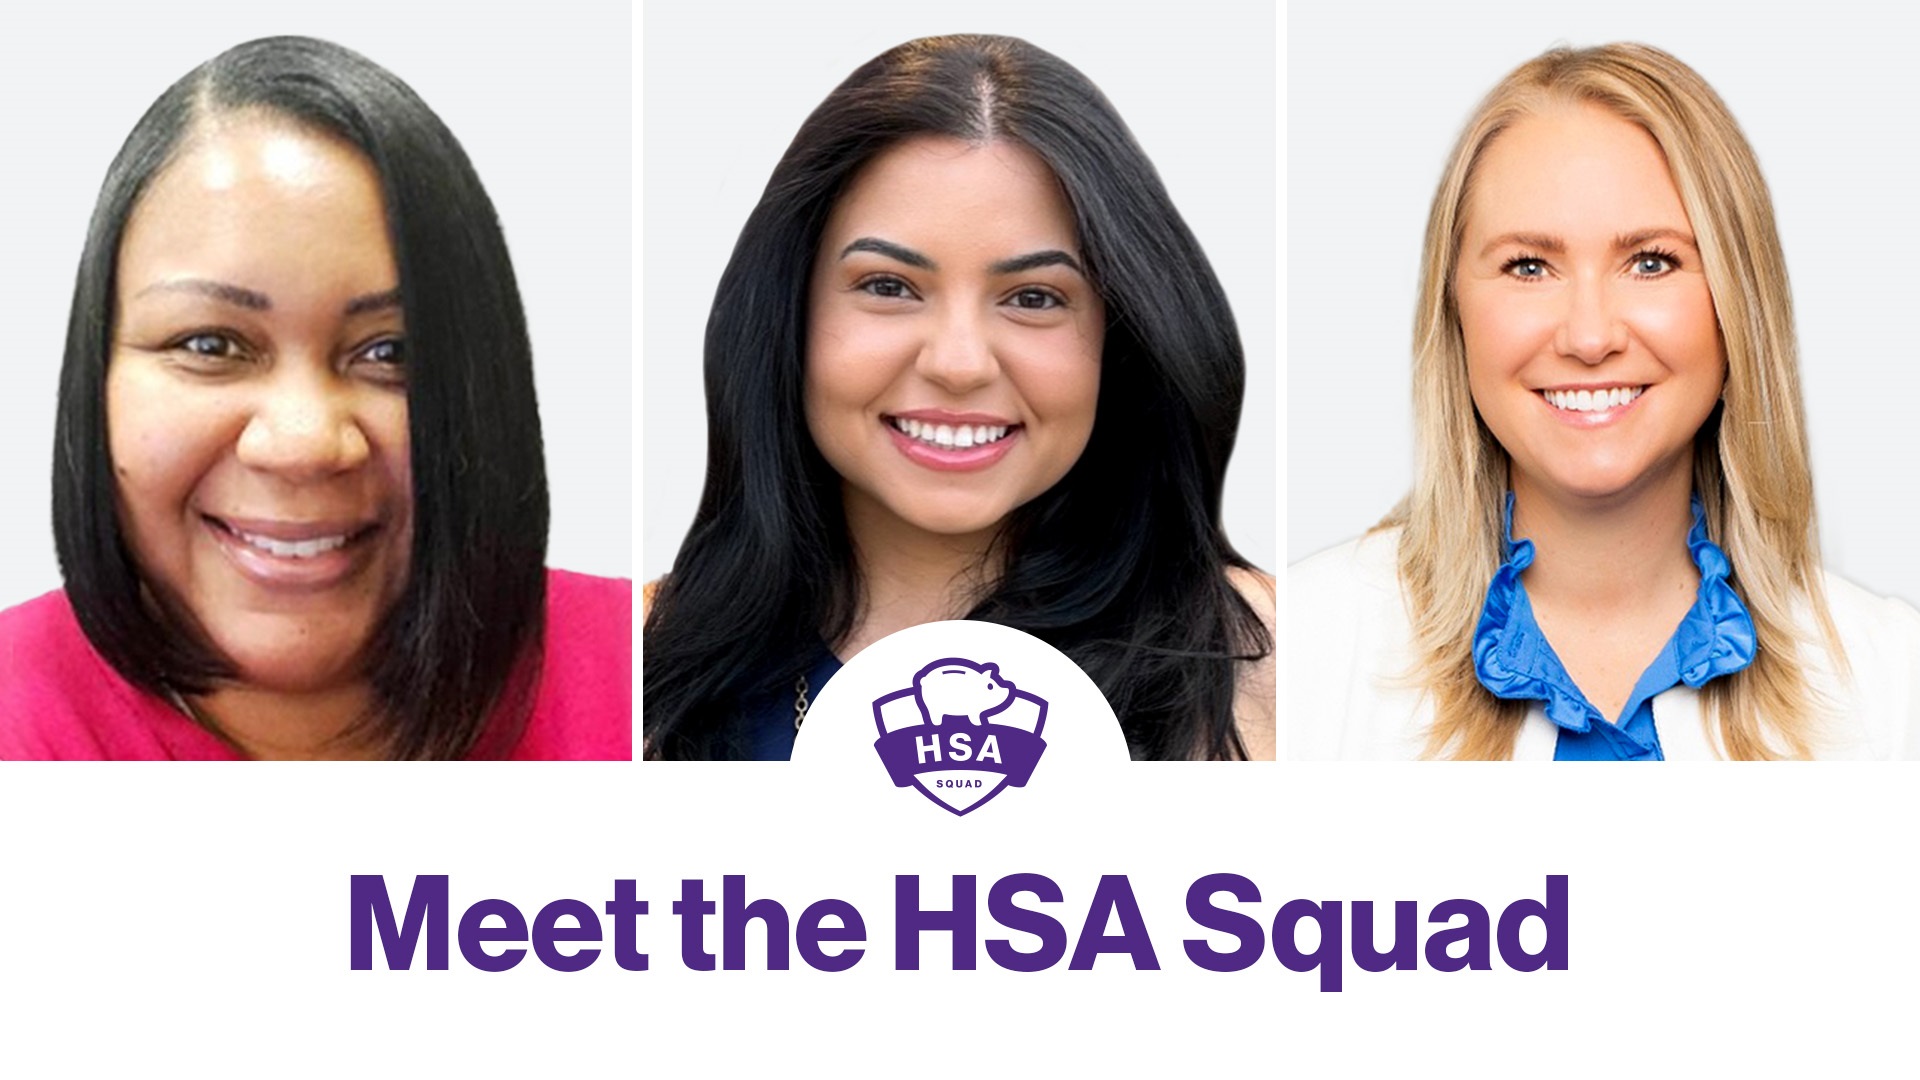 Picture of the HealthEquity HSA Squad, three women benefits professionals answer questions about Health Savings Accounts (HSAs) during open enrollment and beyond.  